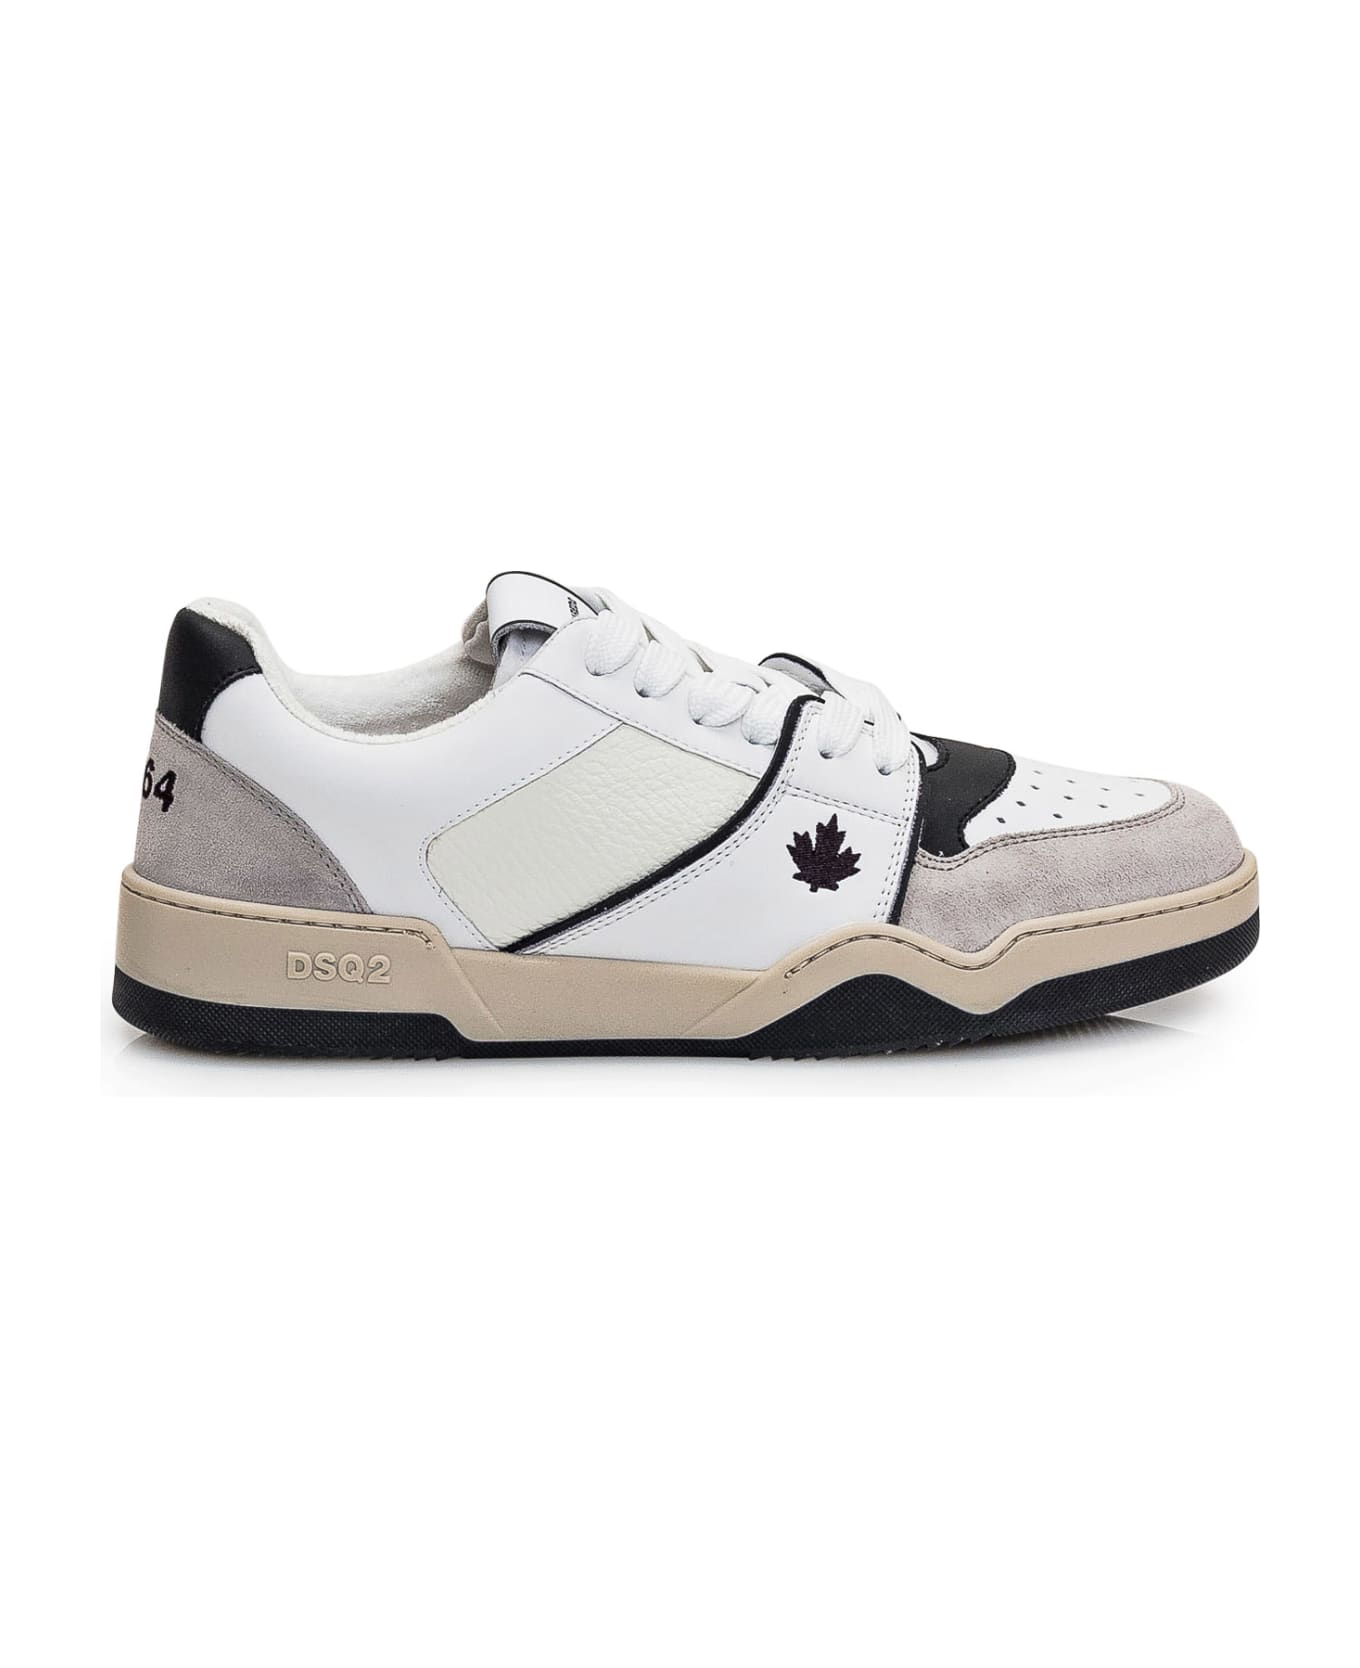 Dsquared2 Spiker Leather Sneakers - white/black